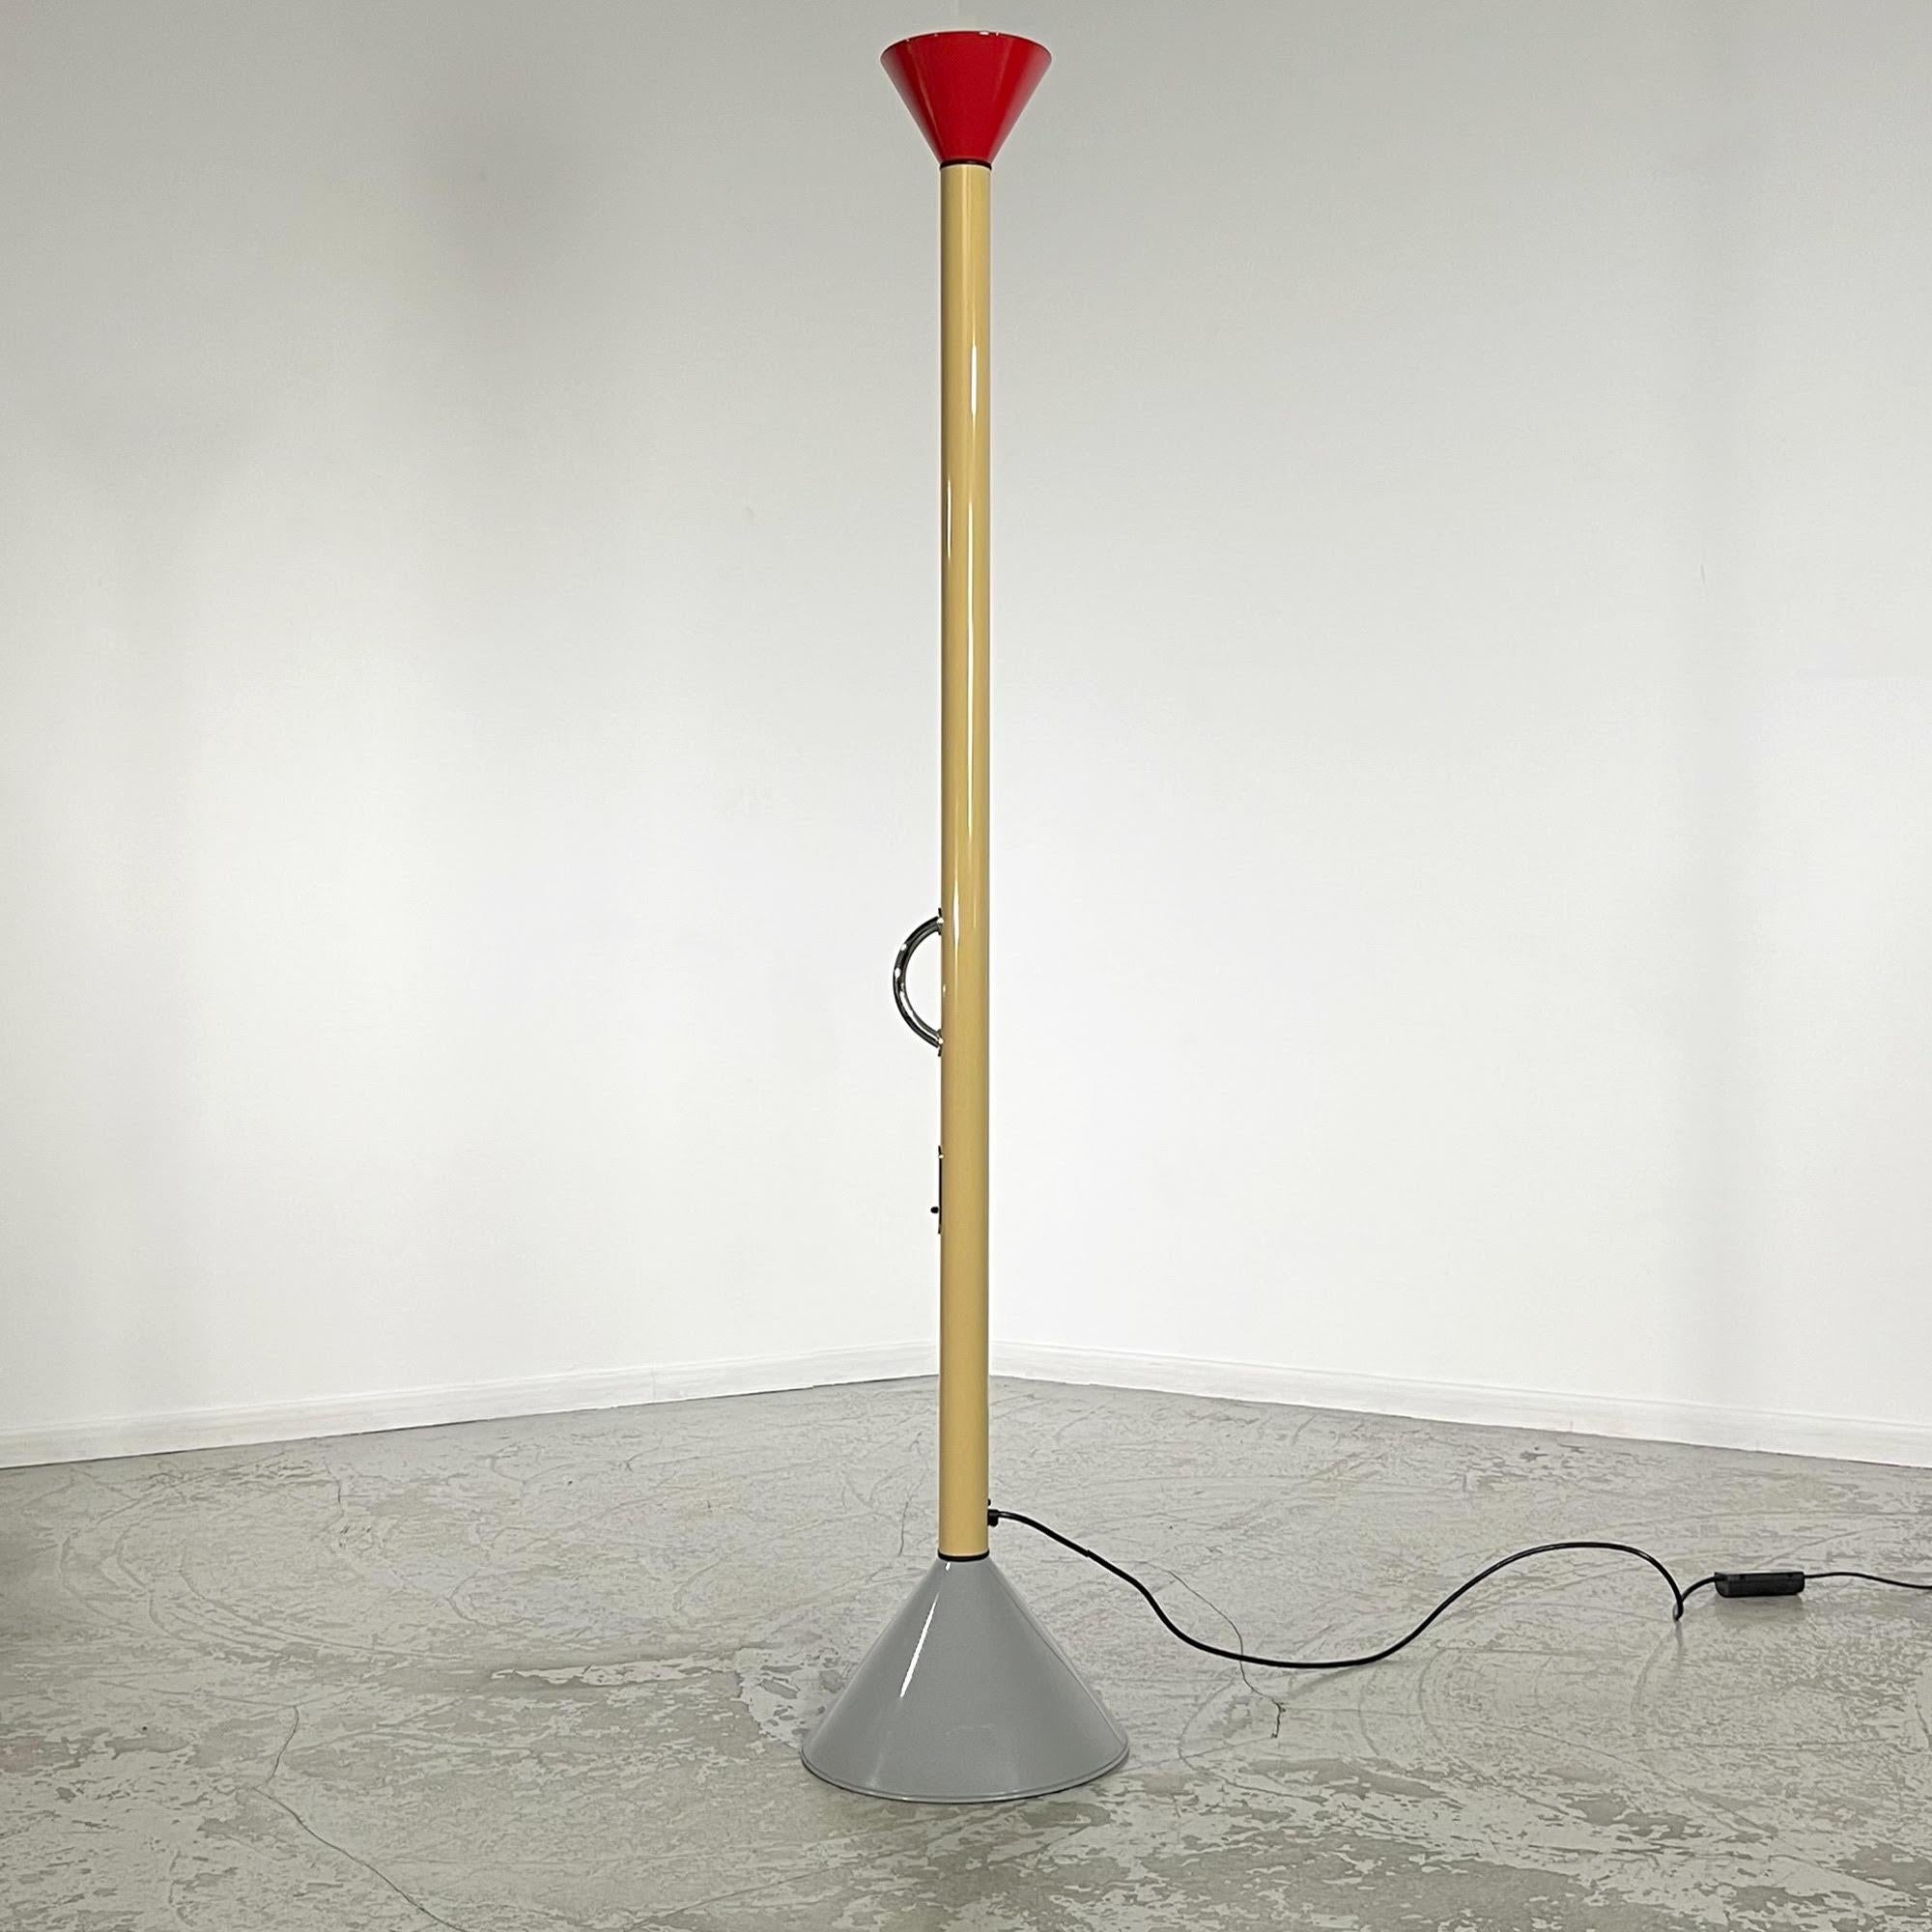 This floor lamp was designed by the famous designer Ettore Sotsass for the Italian publishing house Artemide in 1982. In 1981, the designer founded Memphis. With the financial support of Artemide's boss, the group became an immediate success.